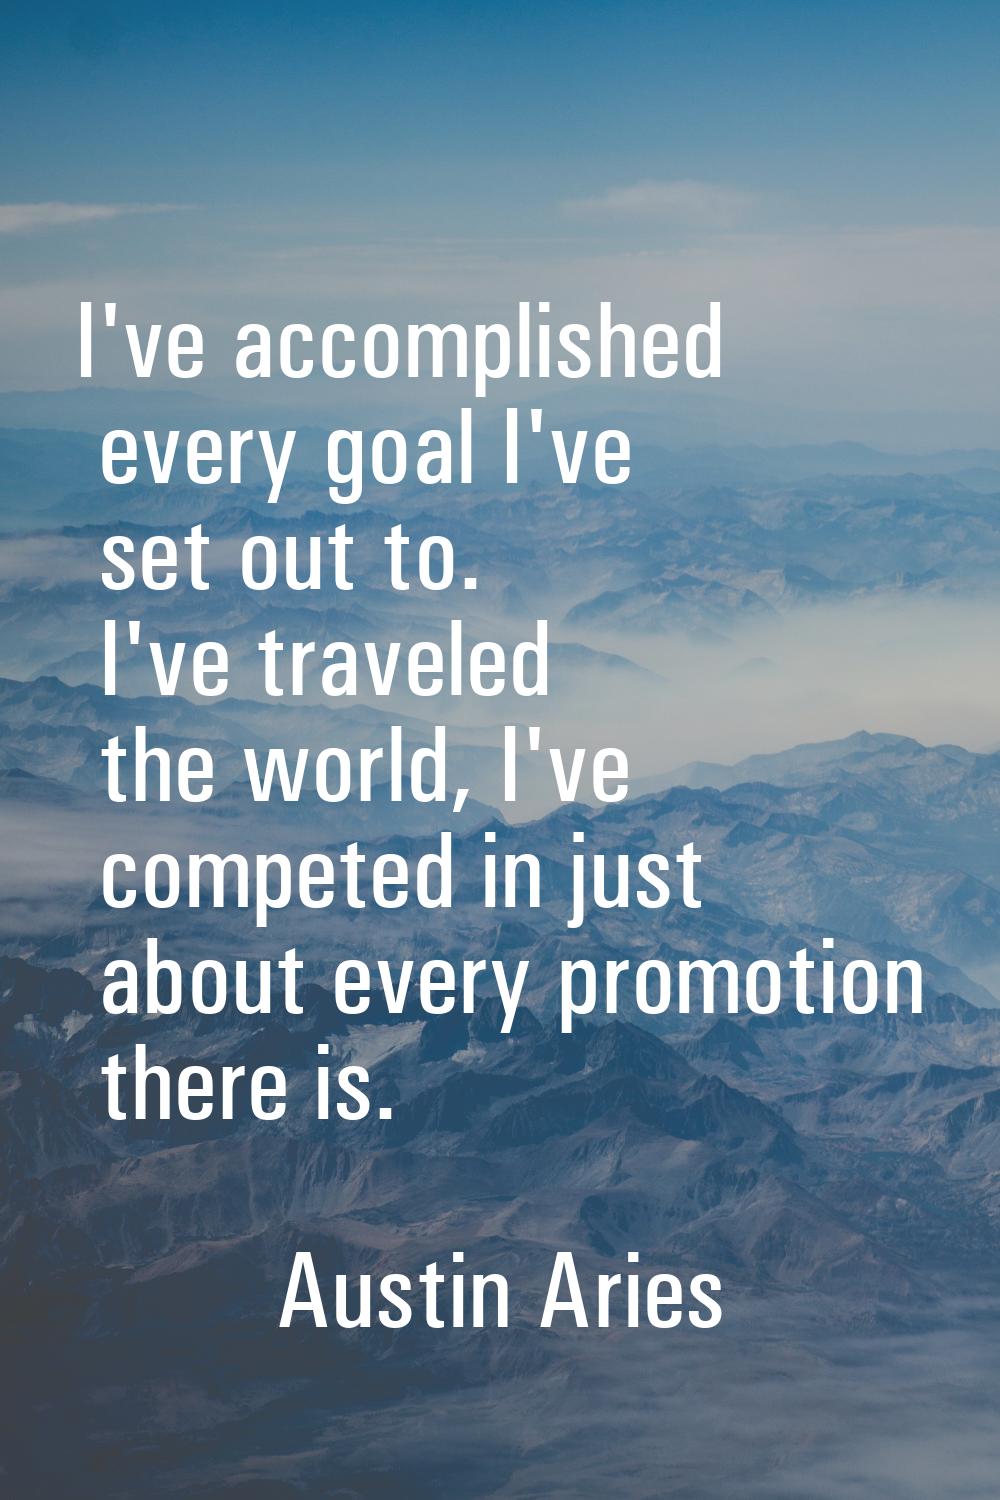 I've accomplished every goal I've set out to. I've traveled the world, I've competed in just about 